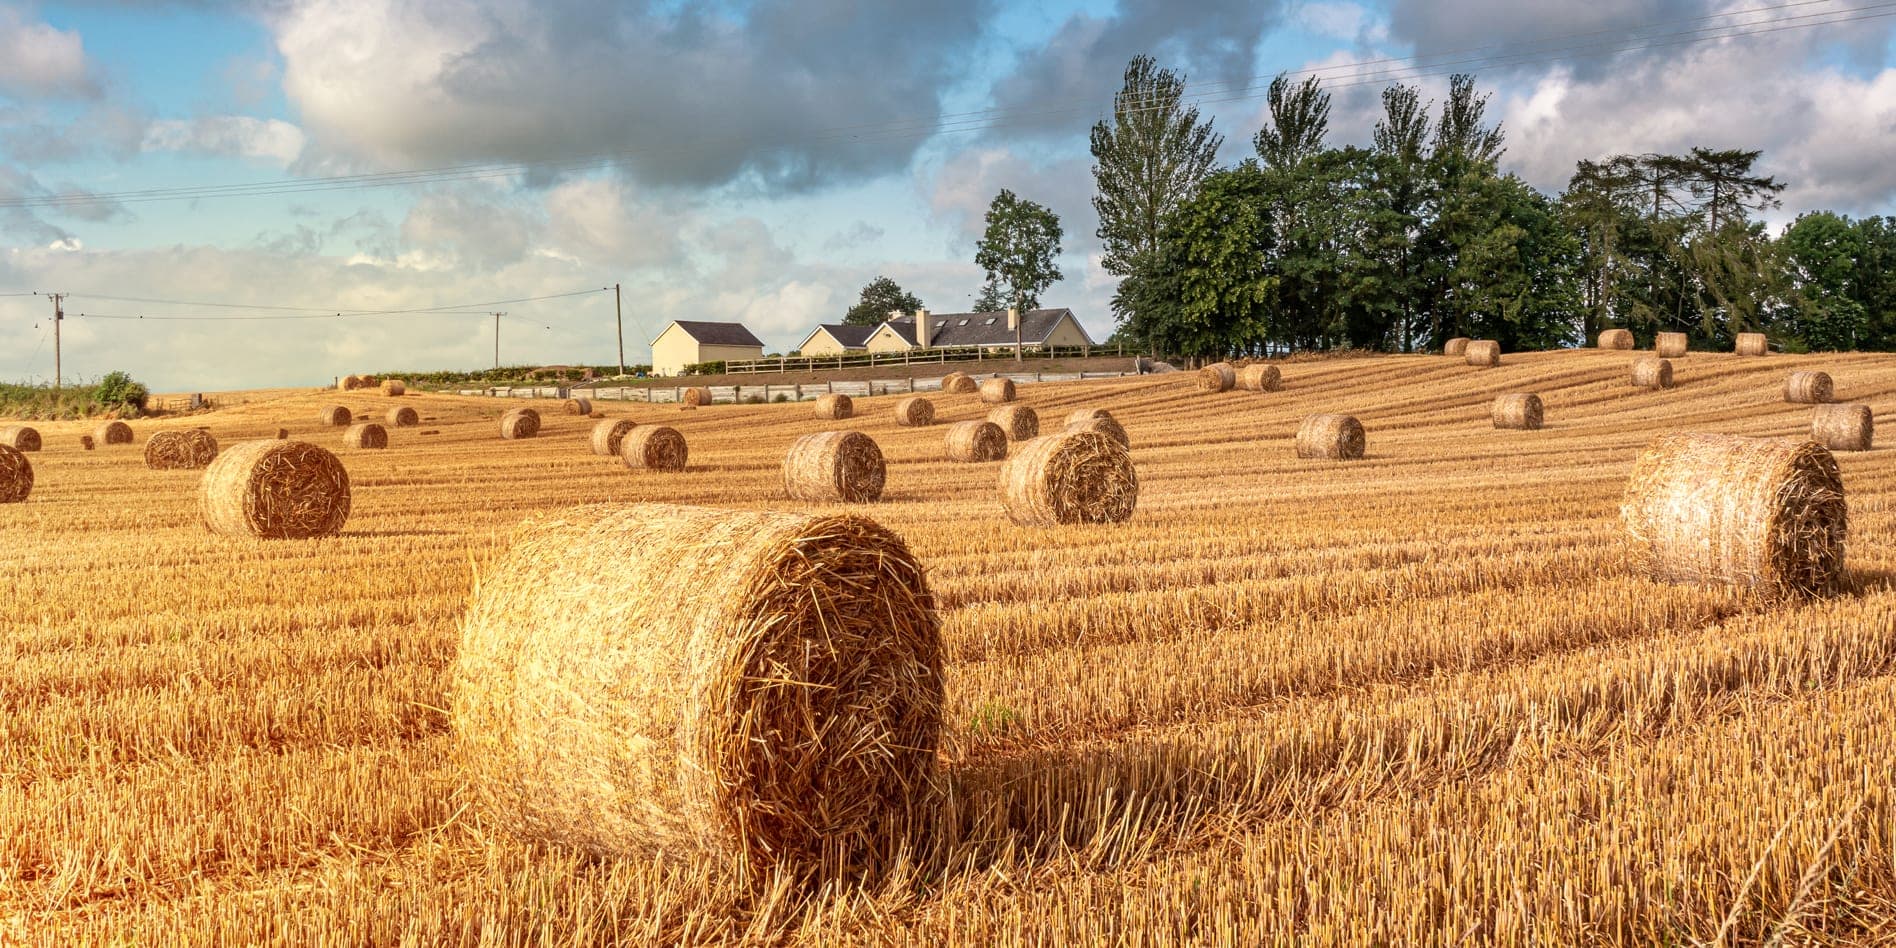 Ireland landscape photography - round straw bales glowing in the warm sunlight